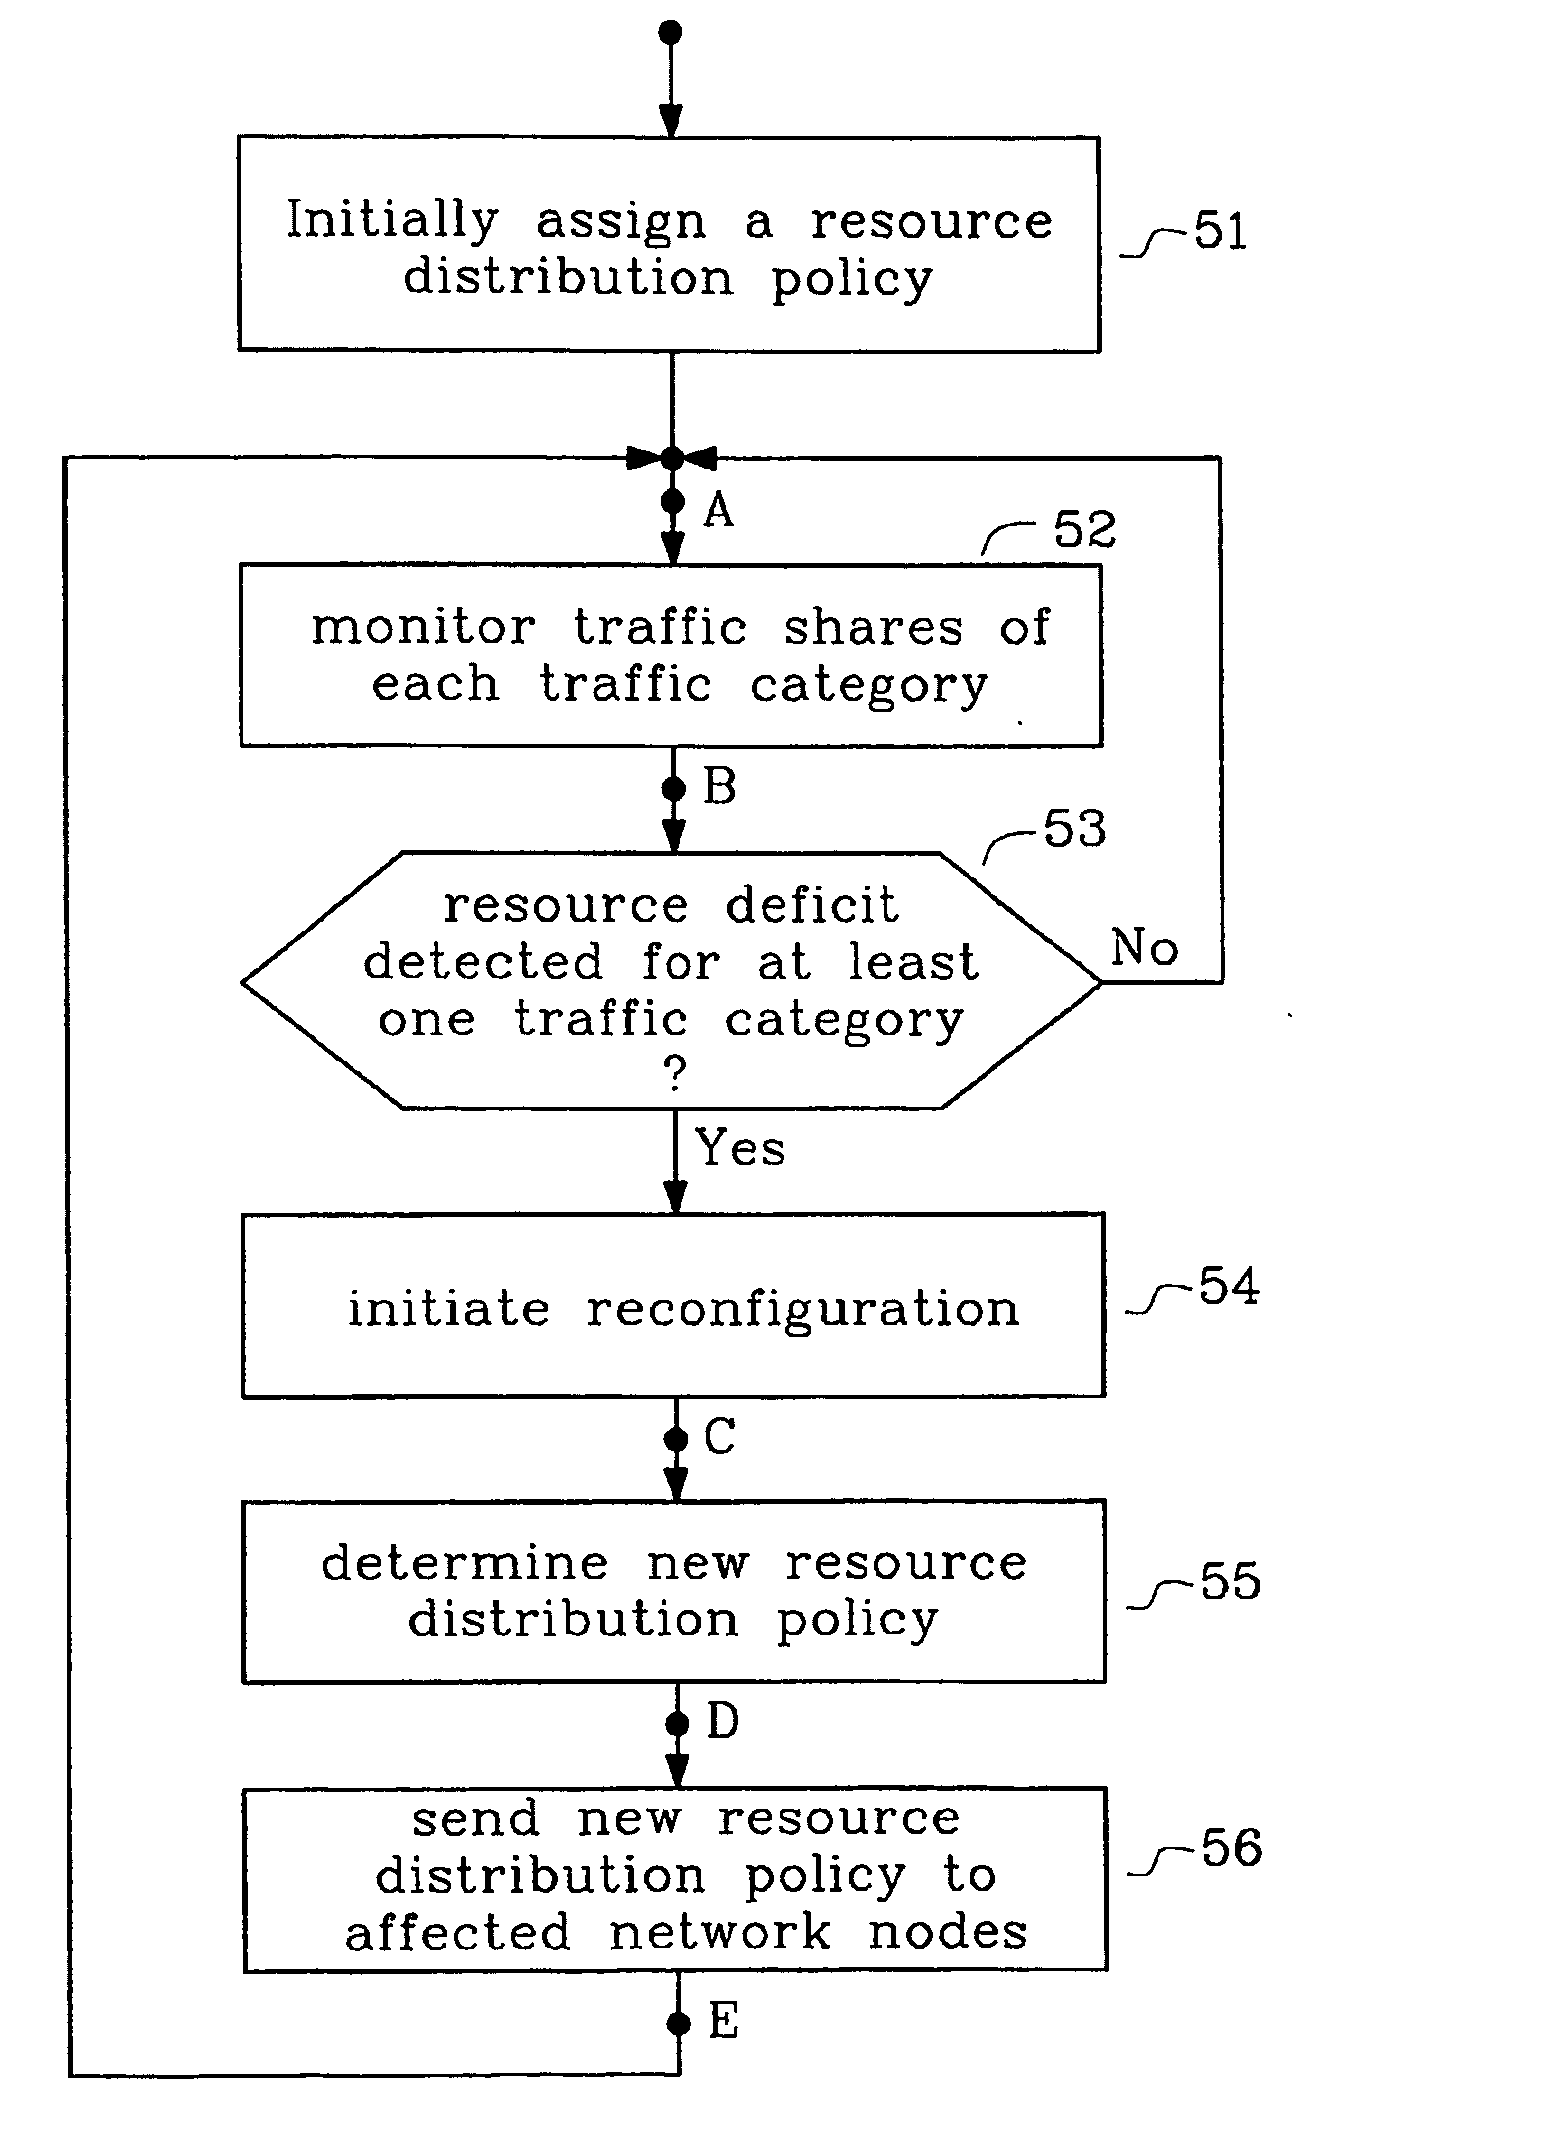 Method and arrangements to achieve a dynamic resource distribution policy in packet based communication networks